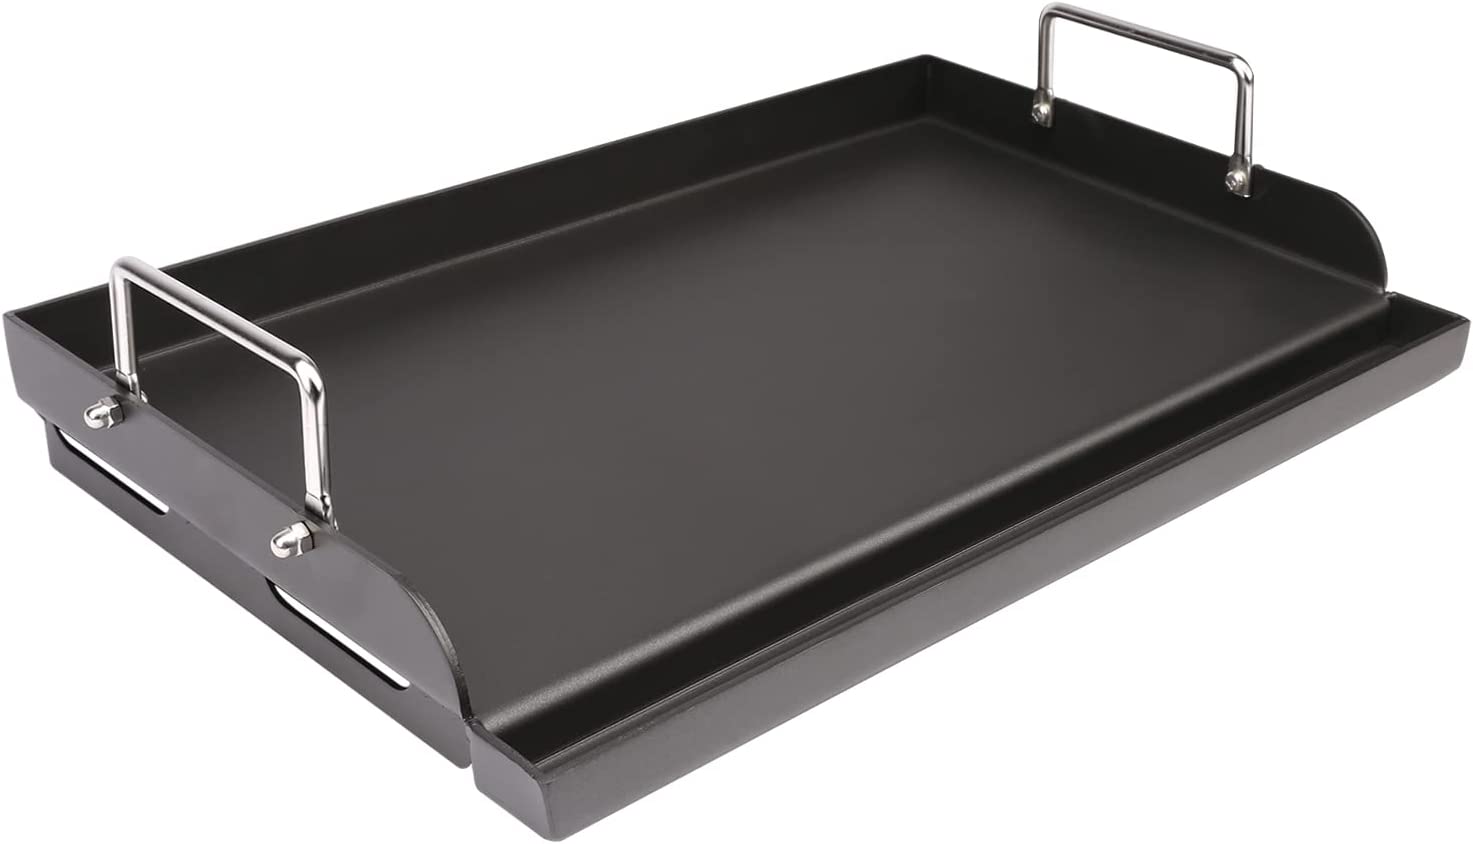 Universal Griddle Flat Top Plate 17 X13” Nonstick Coating Cooking Griddle Pan Fits Weber, Nexgrill, Charbroil, Kenmore Etc Stove/Gas/Charcoal Grills